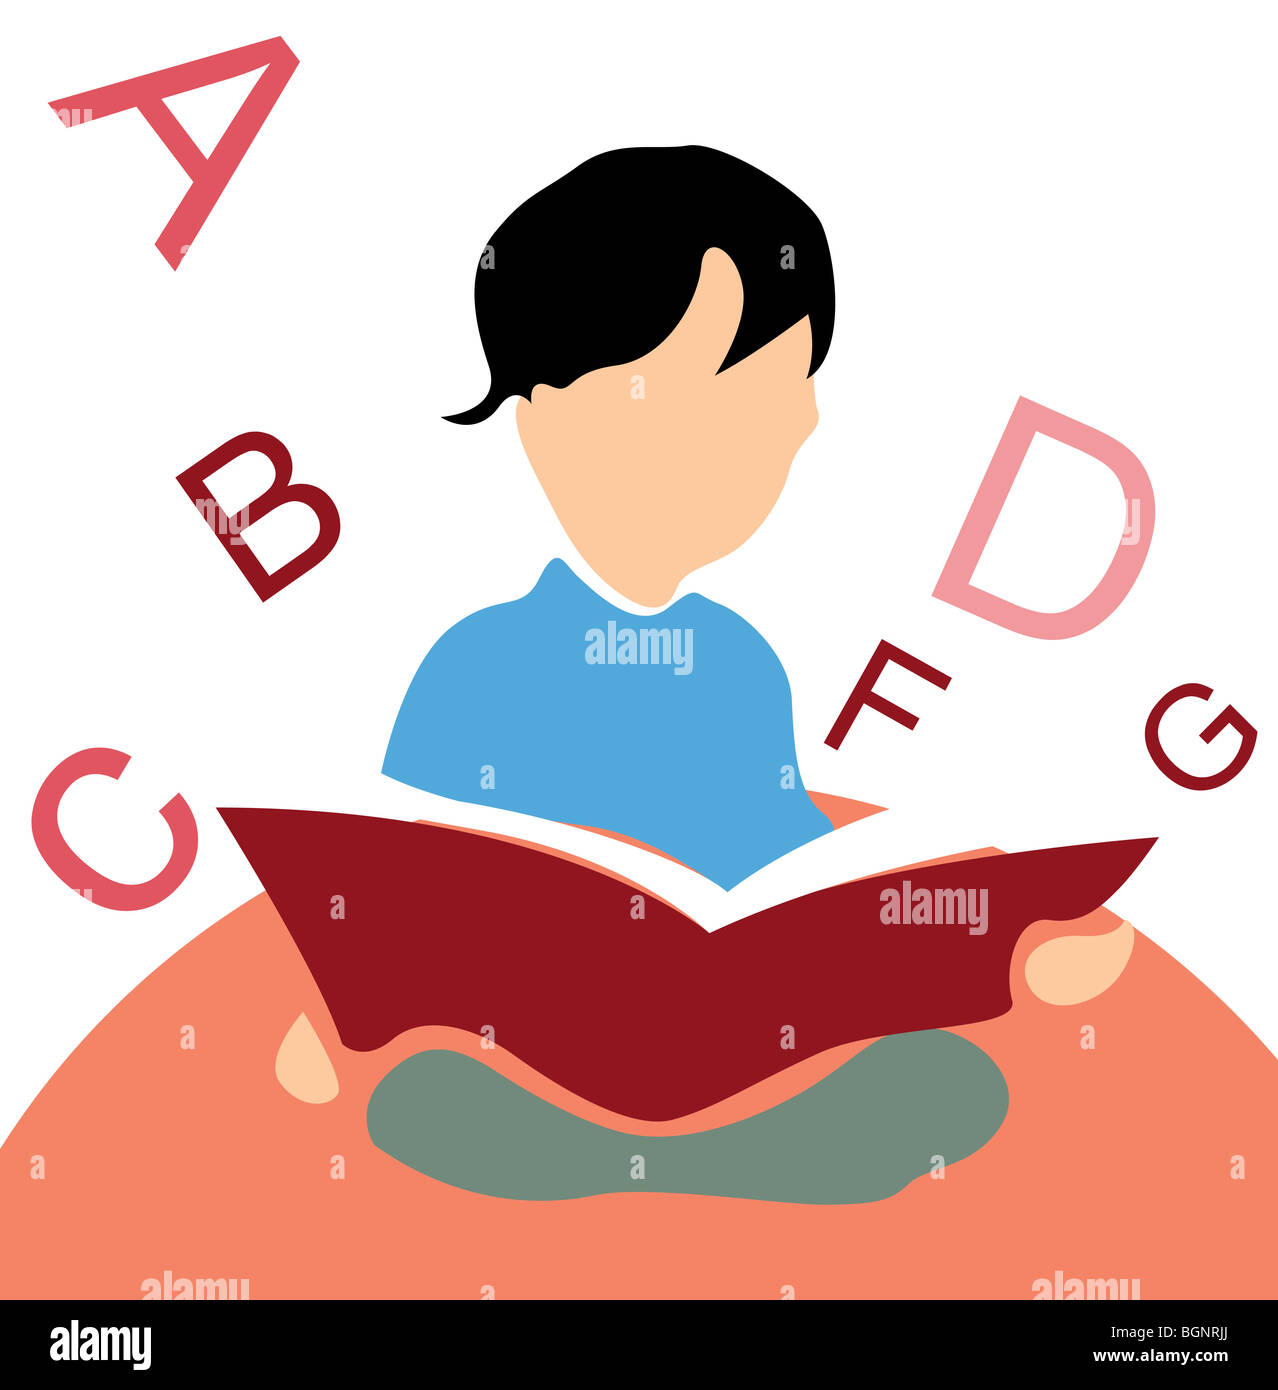 kid reading a book, white background with alphabets Stock Photo